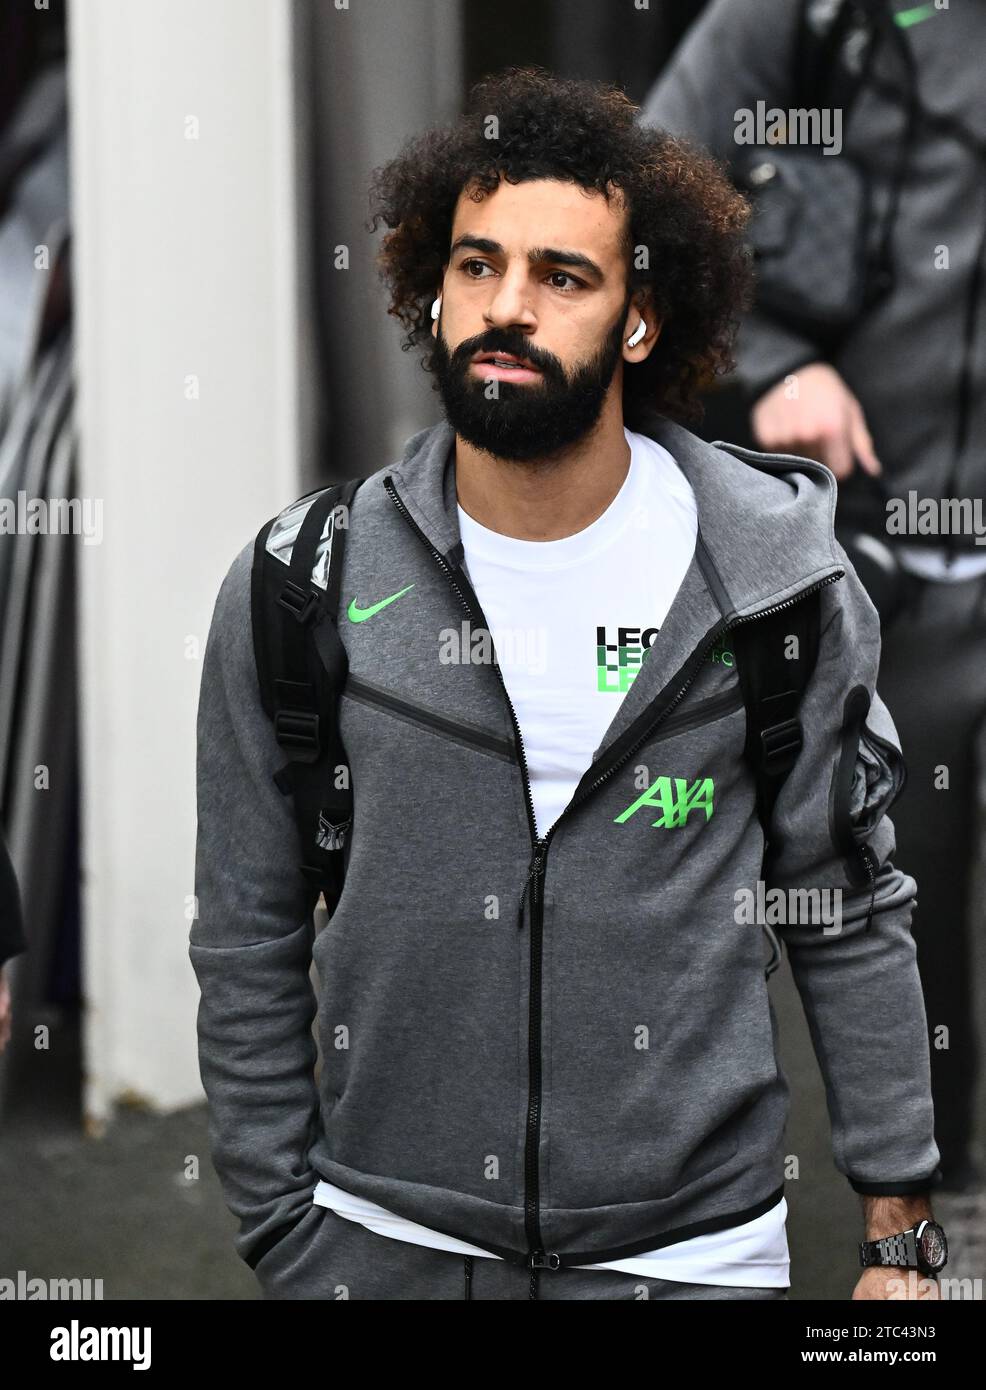 LONDON, ENGLAND - DECEMBER 9: Mohamed Salah of Liverpool FC with headphones during the Premier League match between Crystal Palace and Liverpool FC at Stock Photo